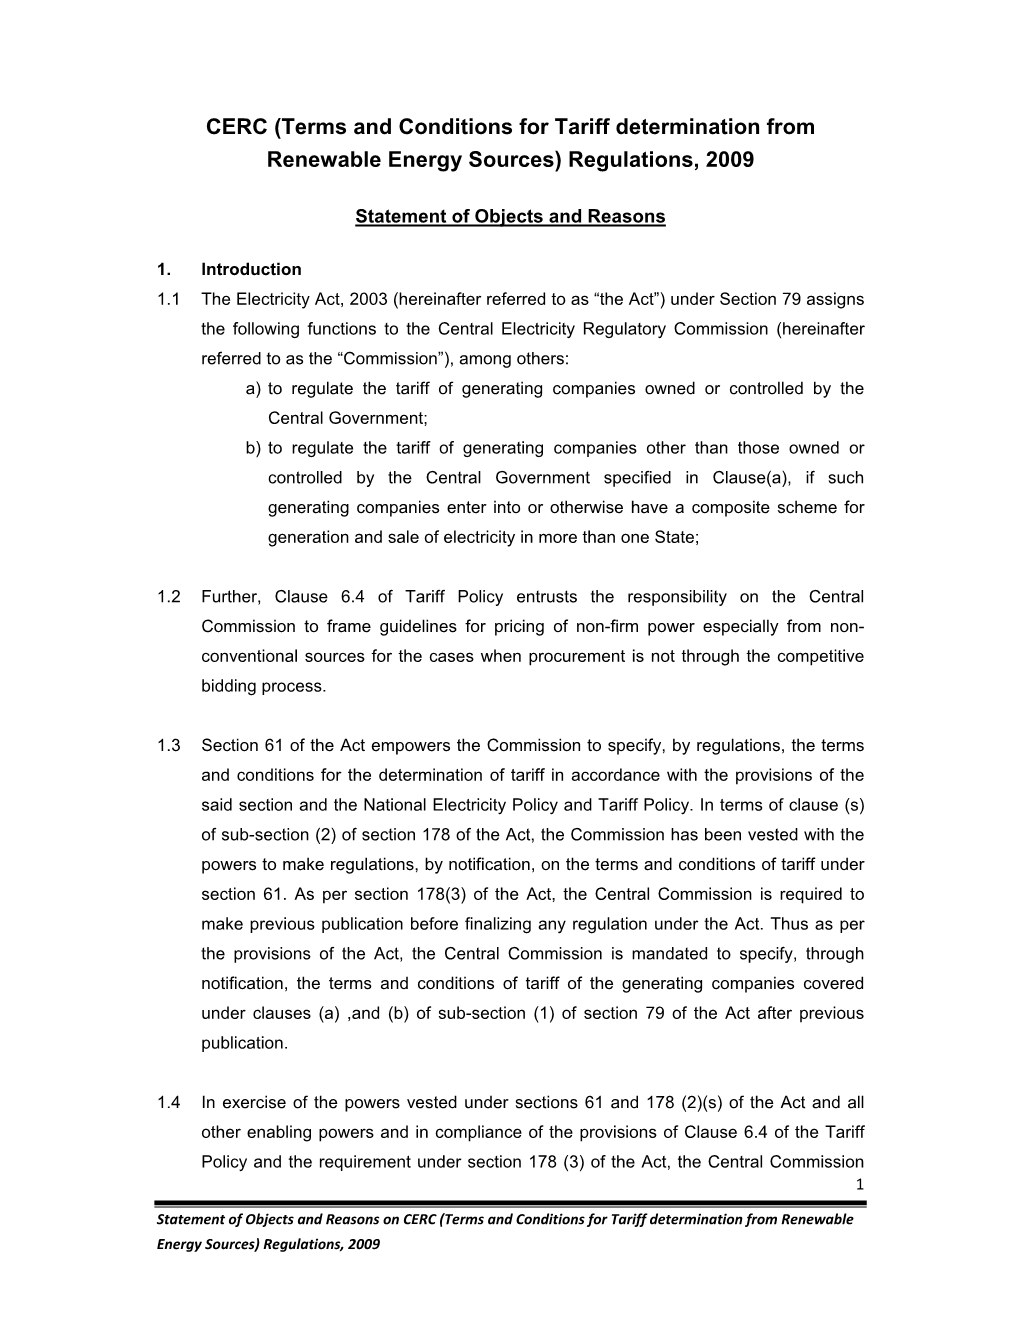 CERC (Terms and Conditions for Tariff Determination from Renewable Energy Sources) Regulations, 2009